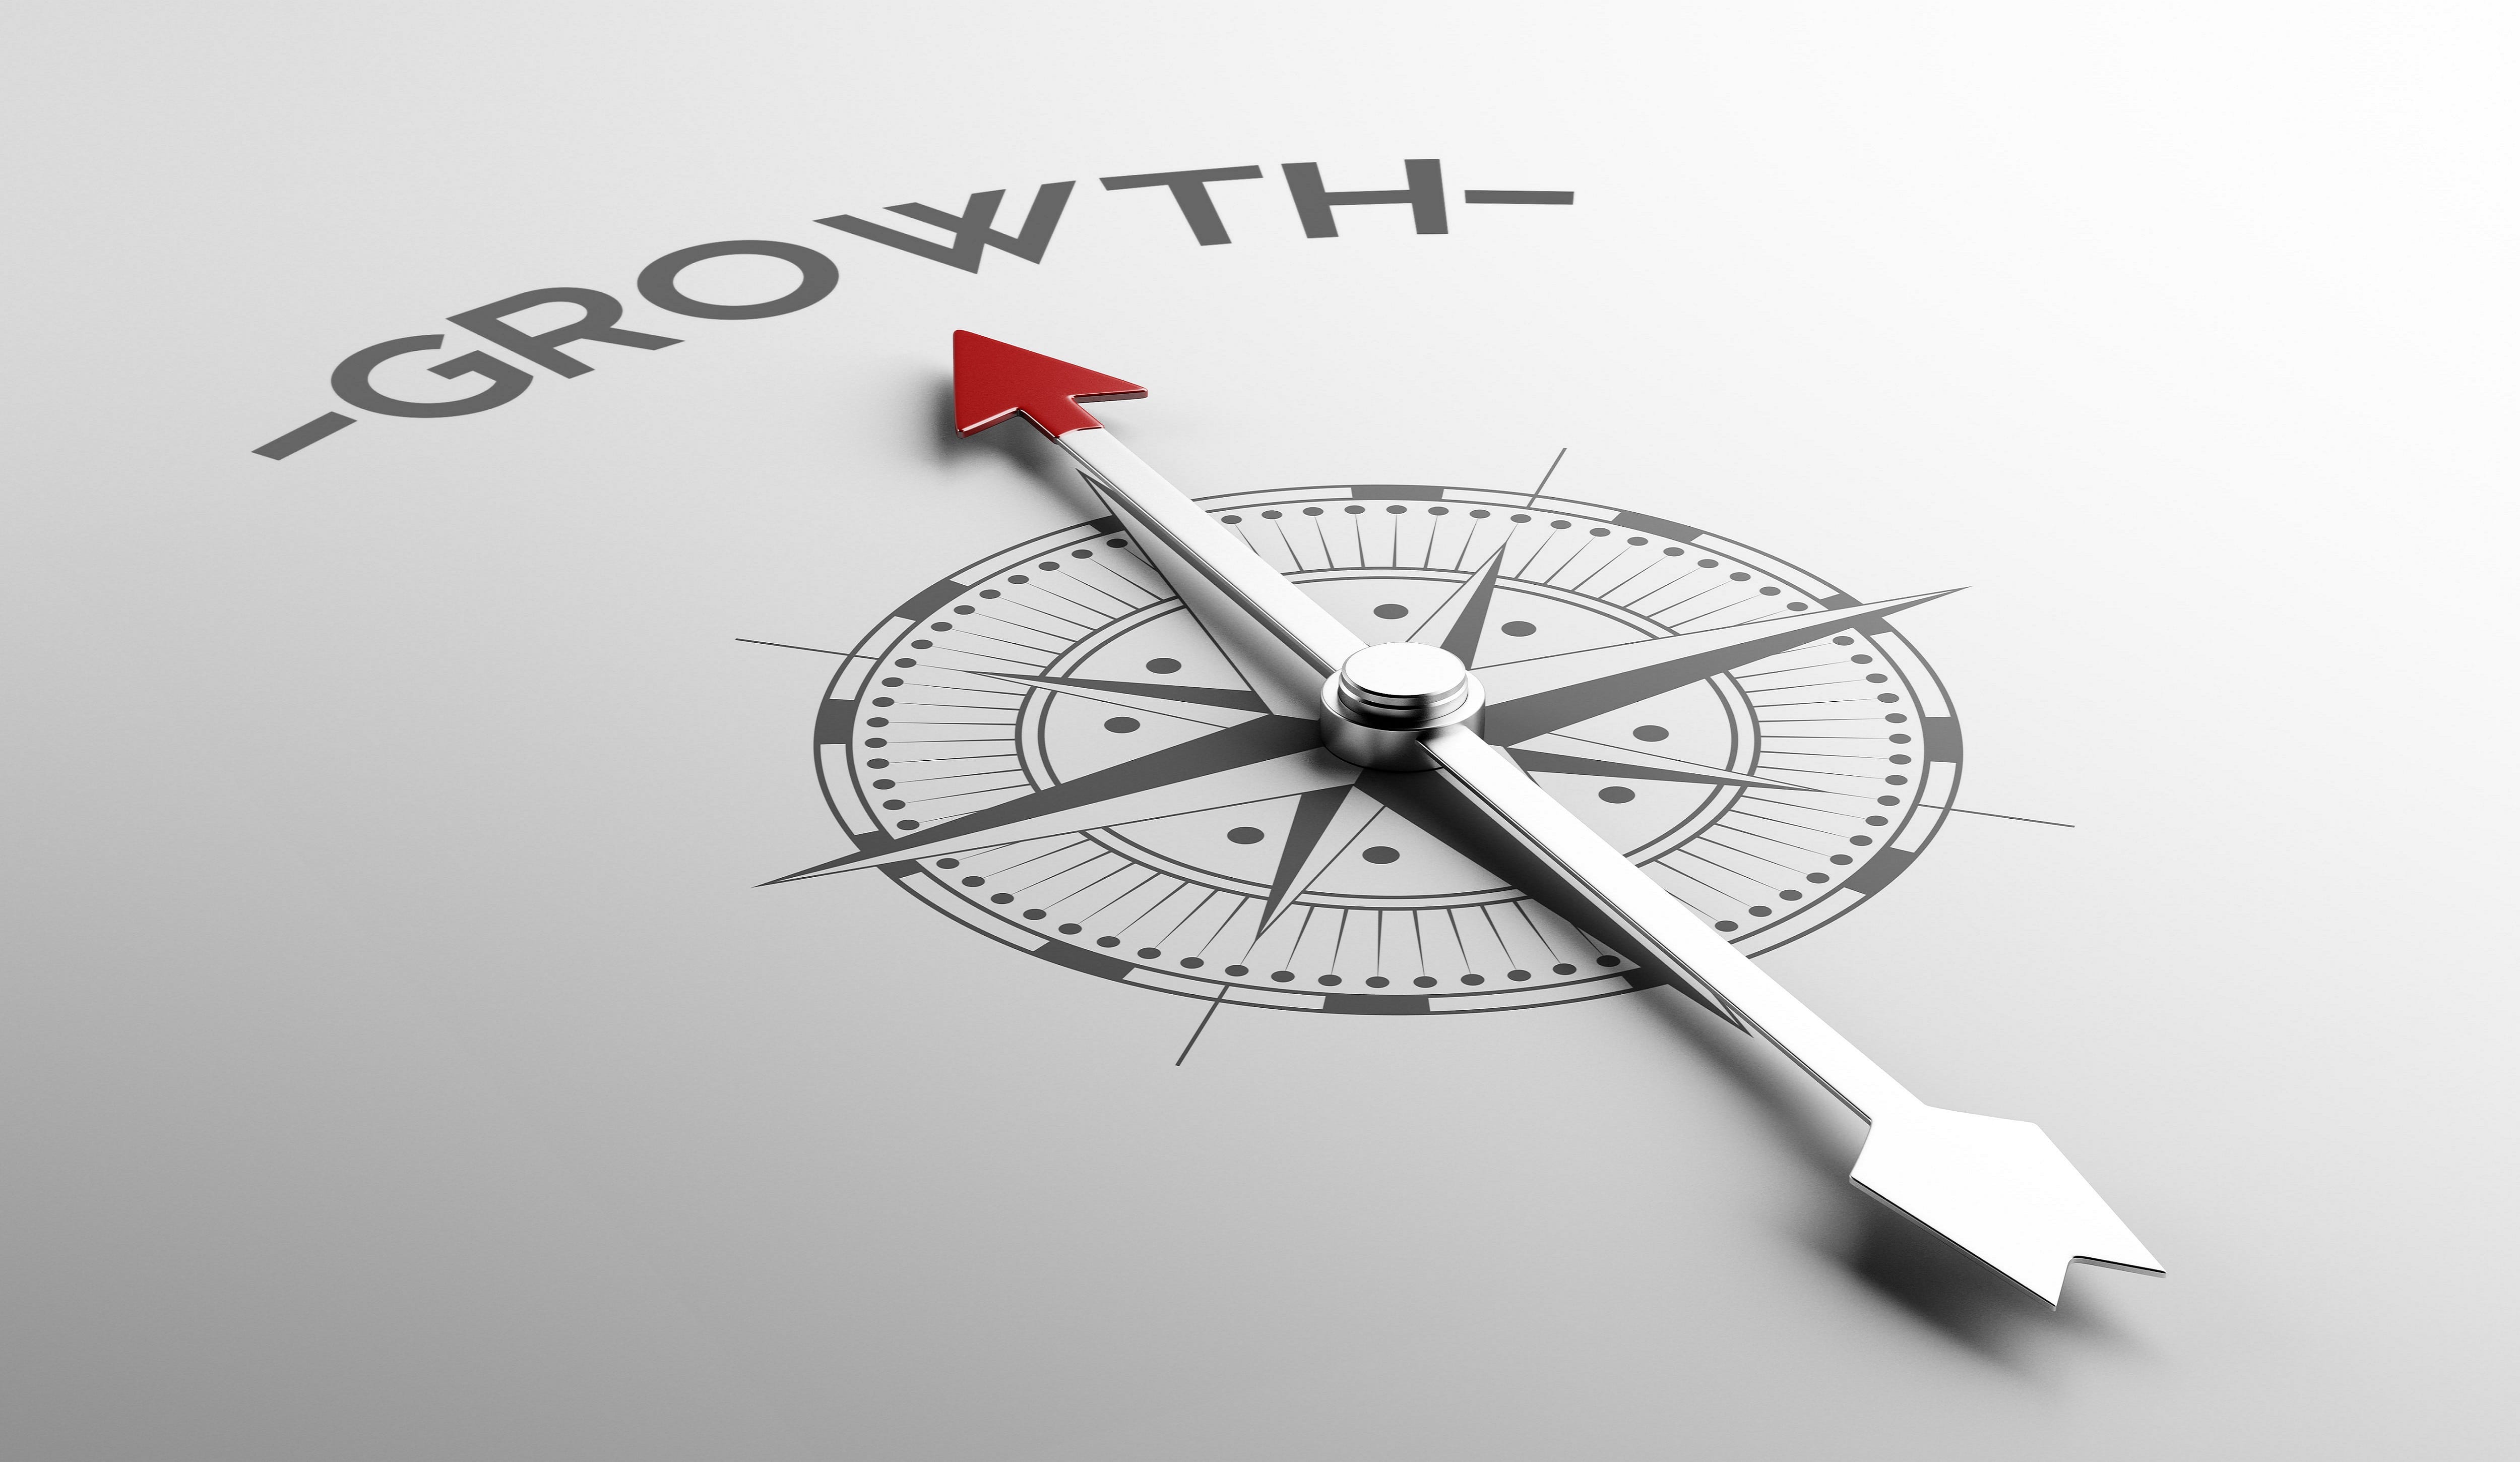 Blogpost titlepicture: a route to growth